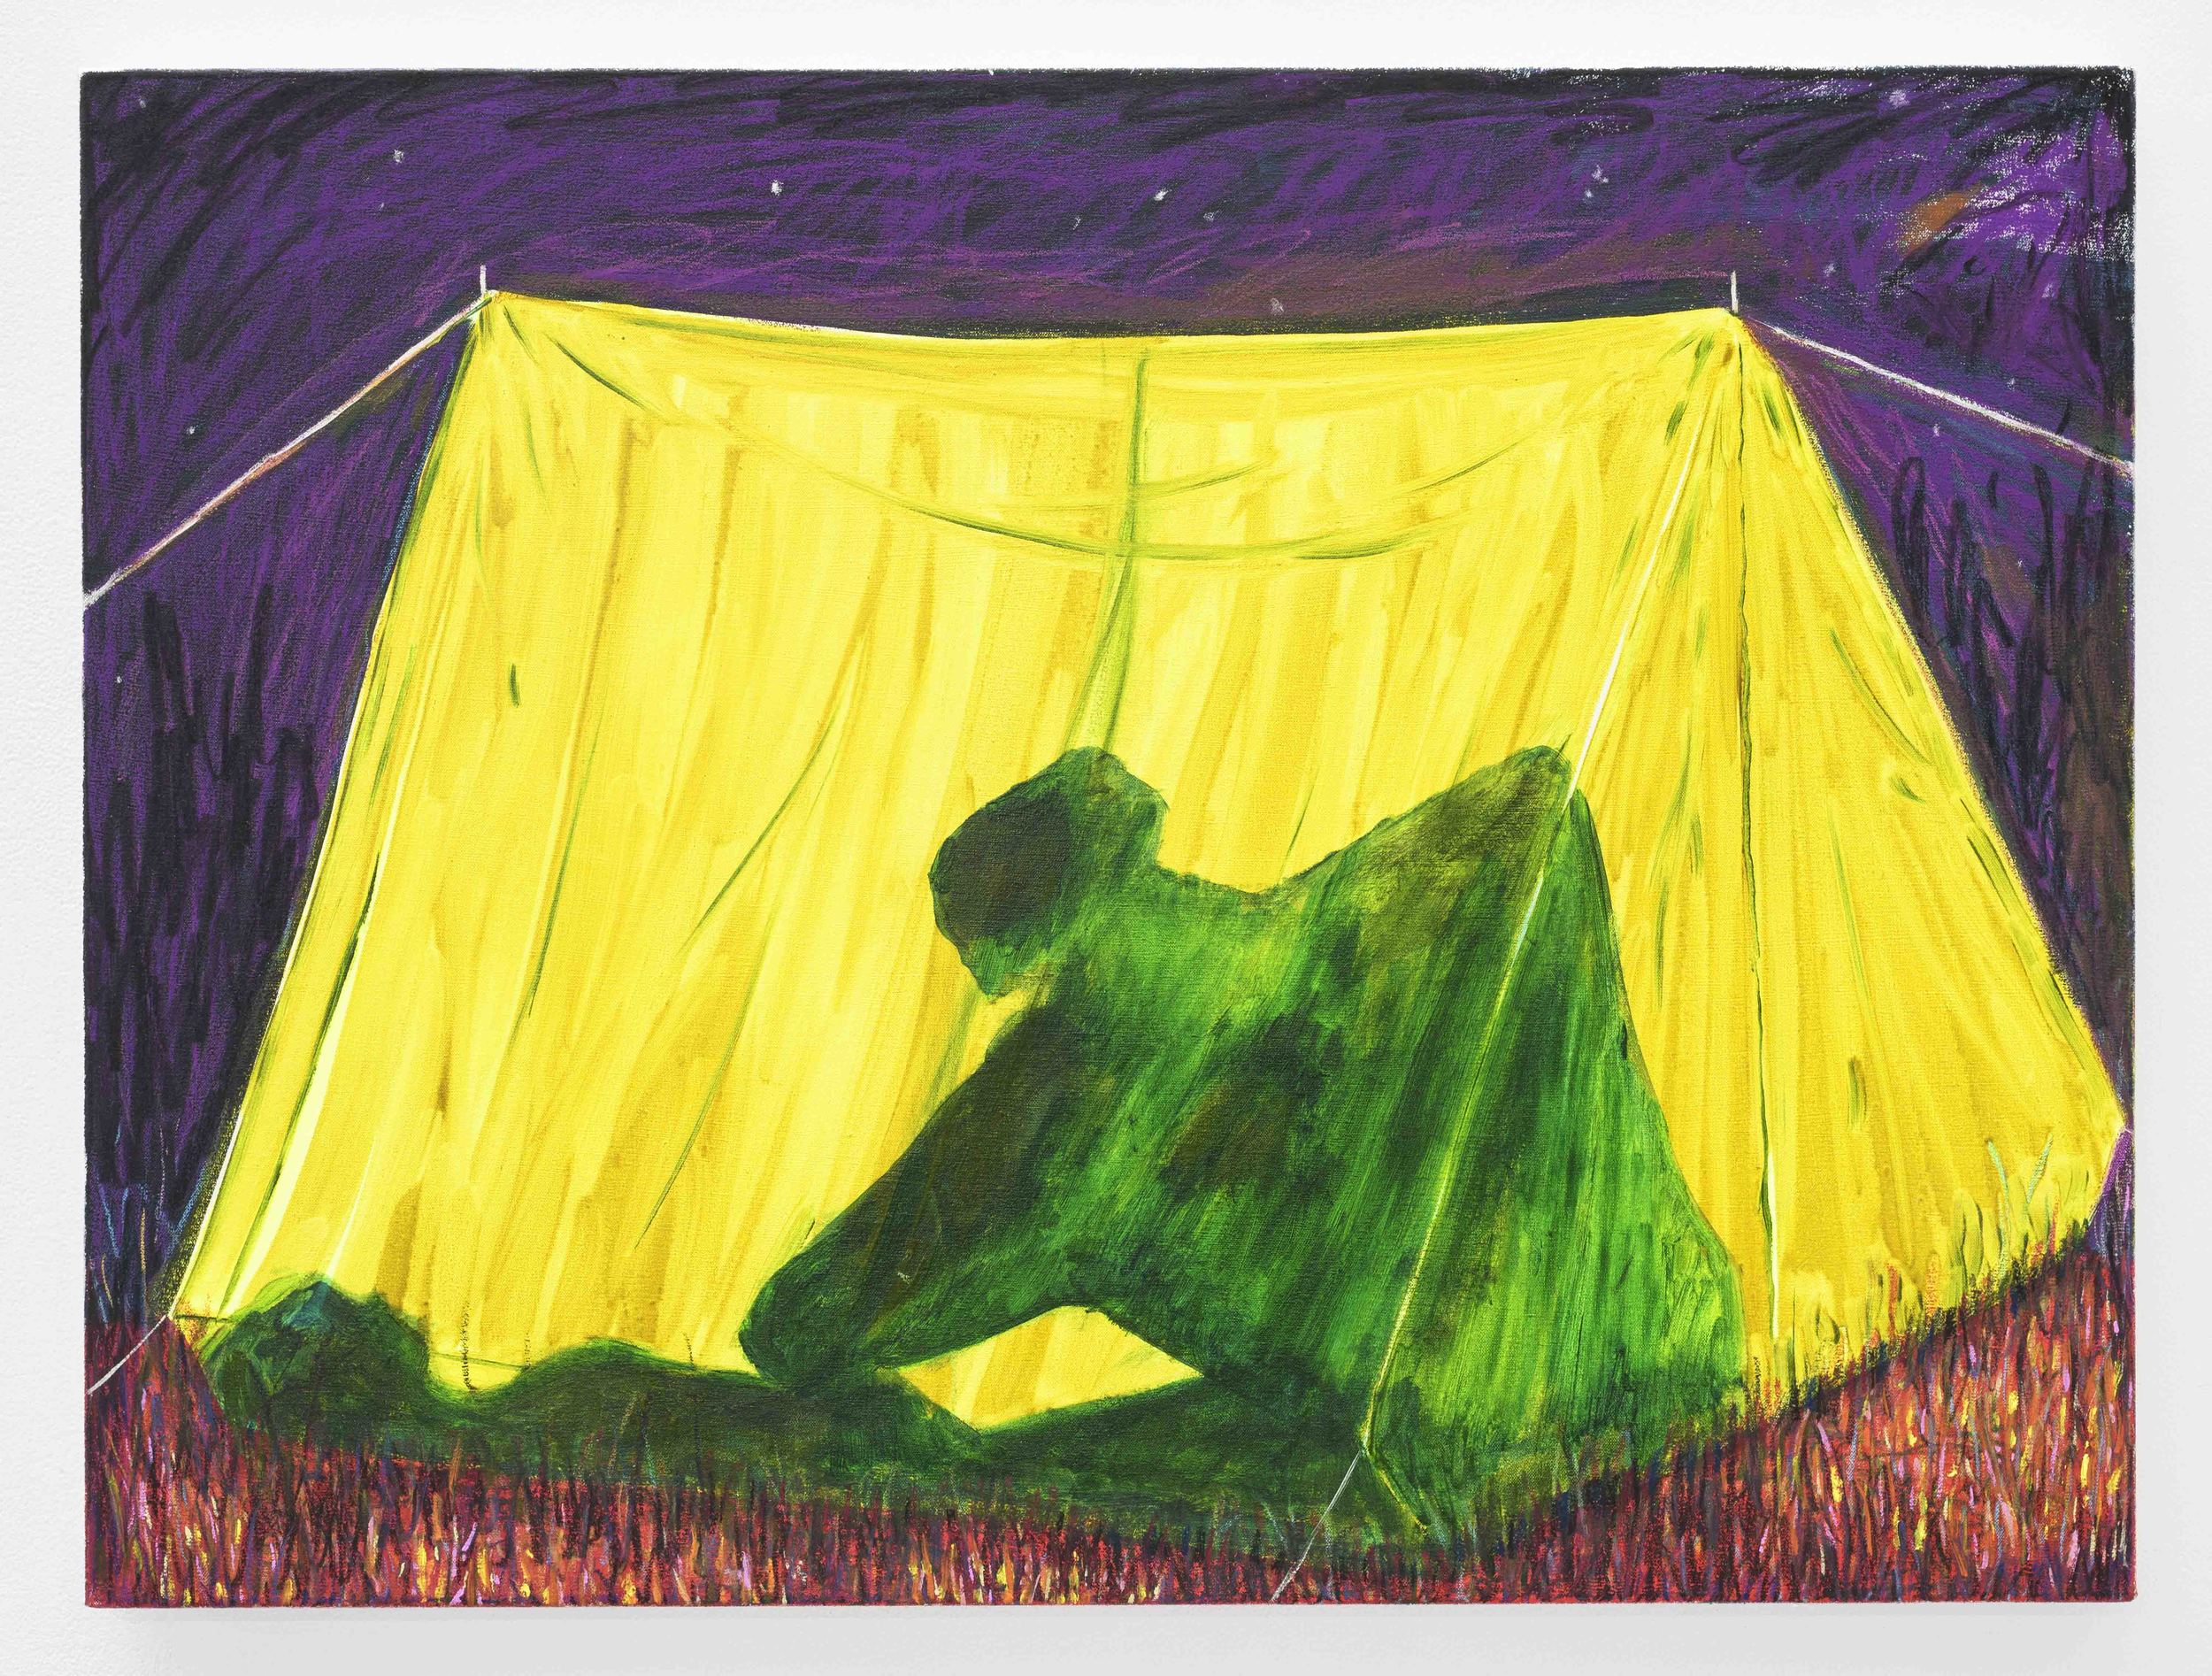  Sex in a Tent  Oil and Acrylic on Cotton  60 x 80 cm  2015 